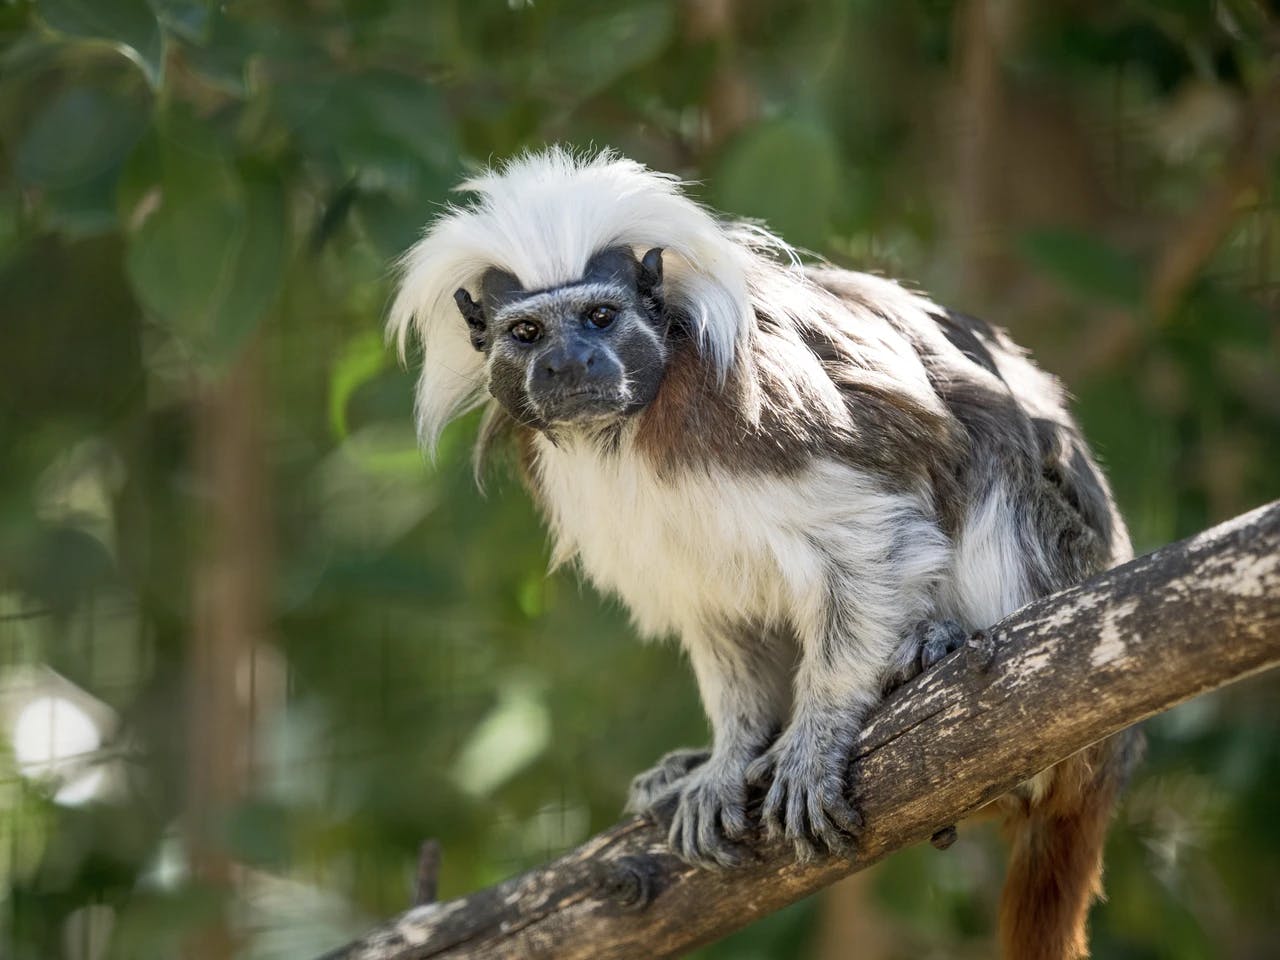 Protecting the forest home of the critically endangered cotton-top tamarins in Northern Colombia